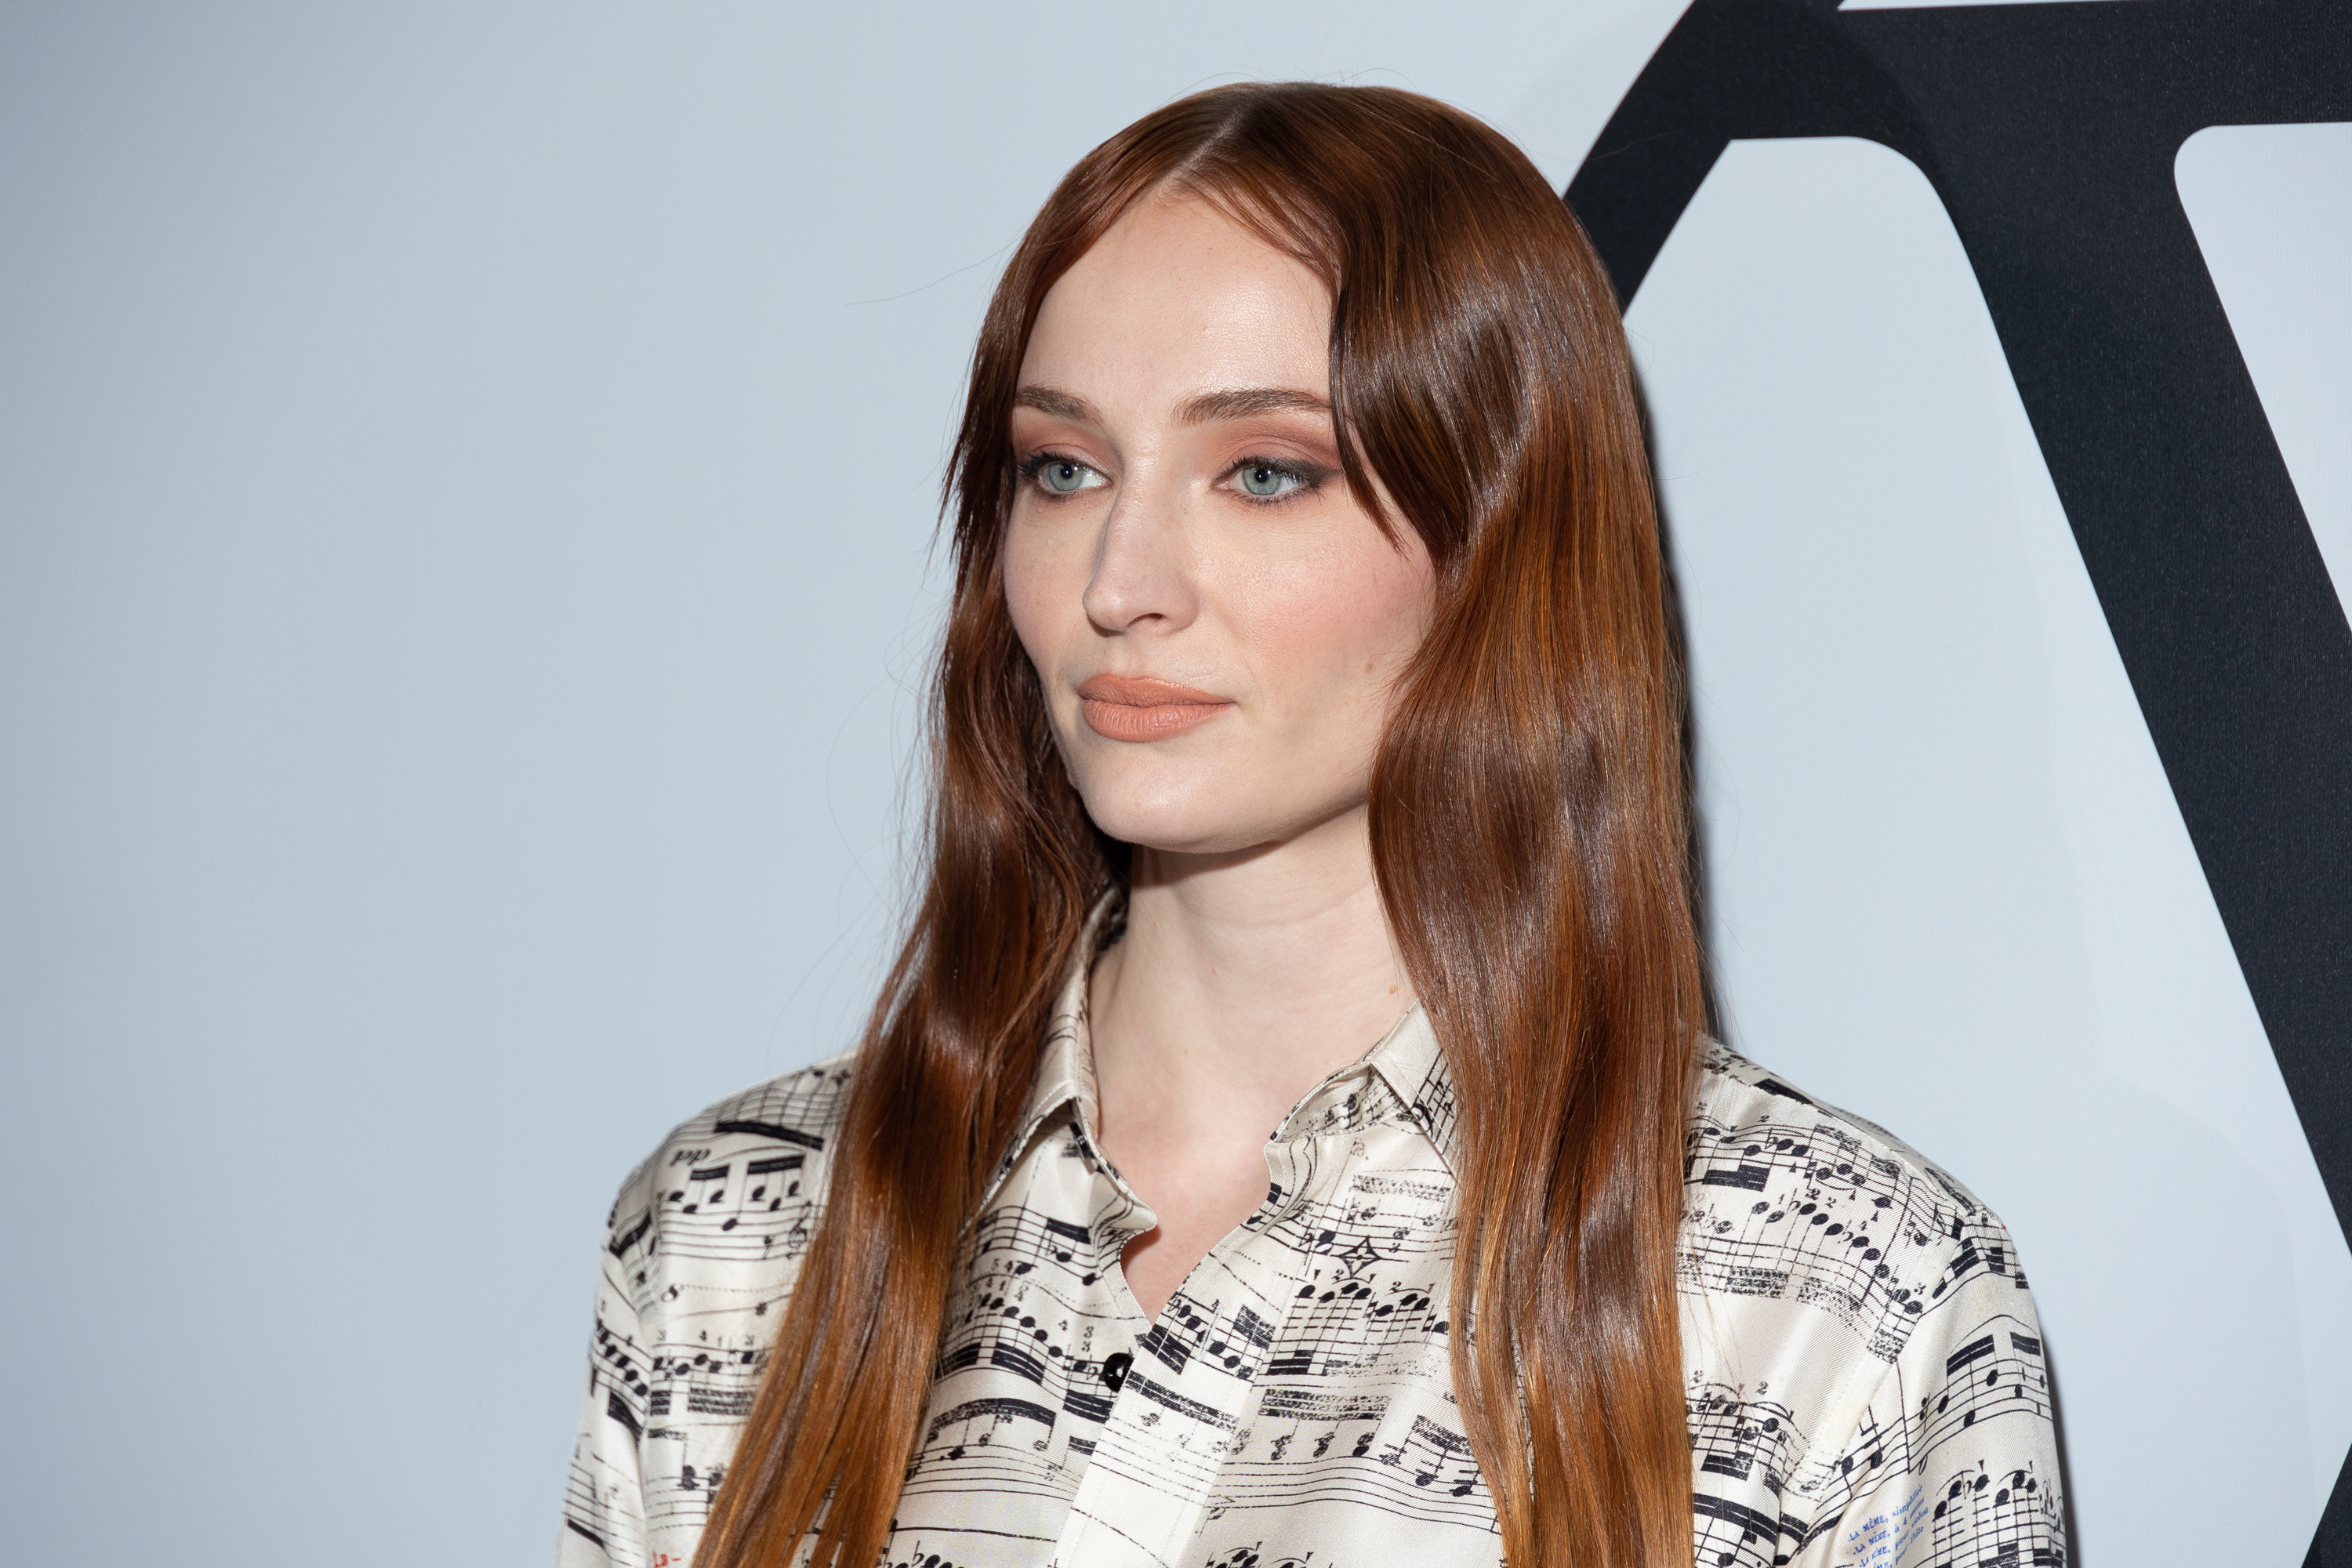 Close-up of Sophie at a media event